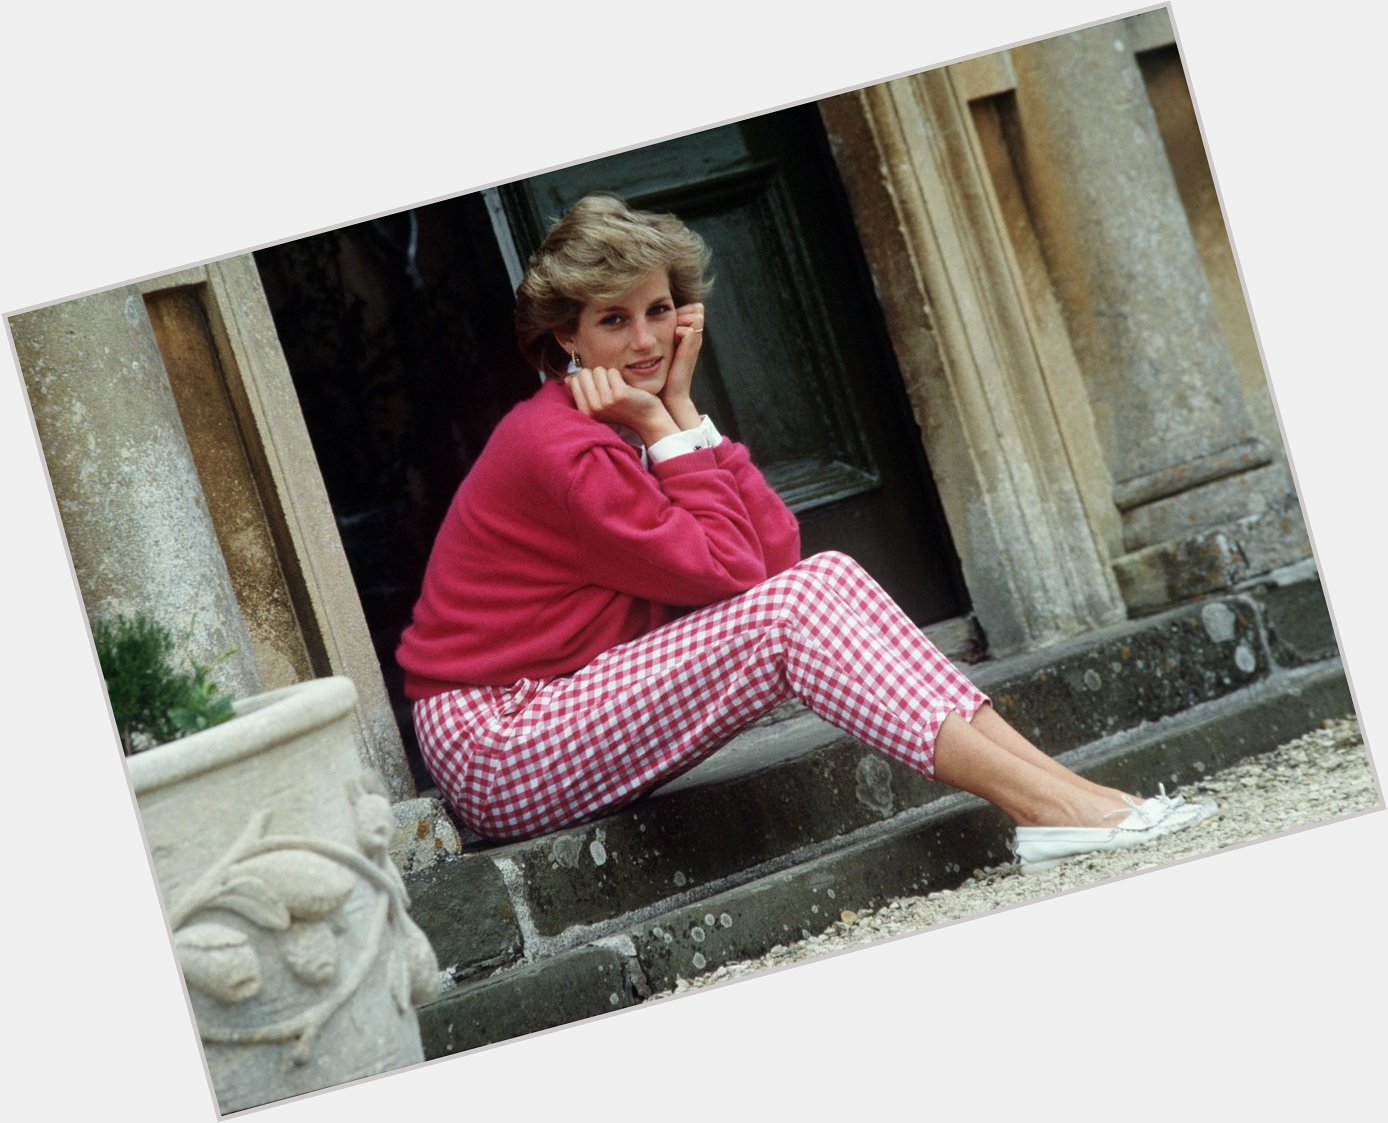 Happy Birthday to the REAL Queen of the UK - Princess Diana. She would\ve been 60 today!   